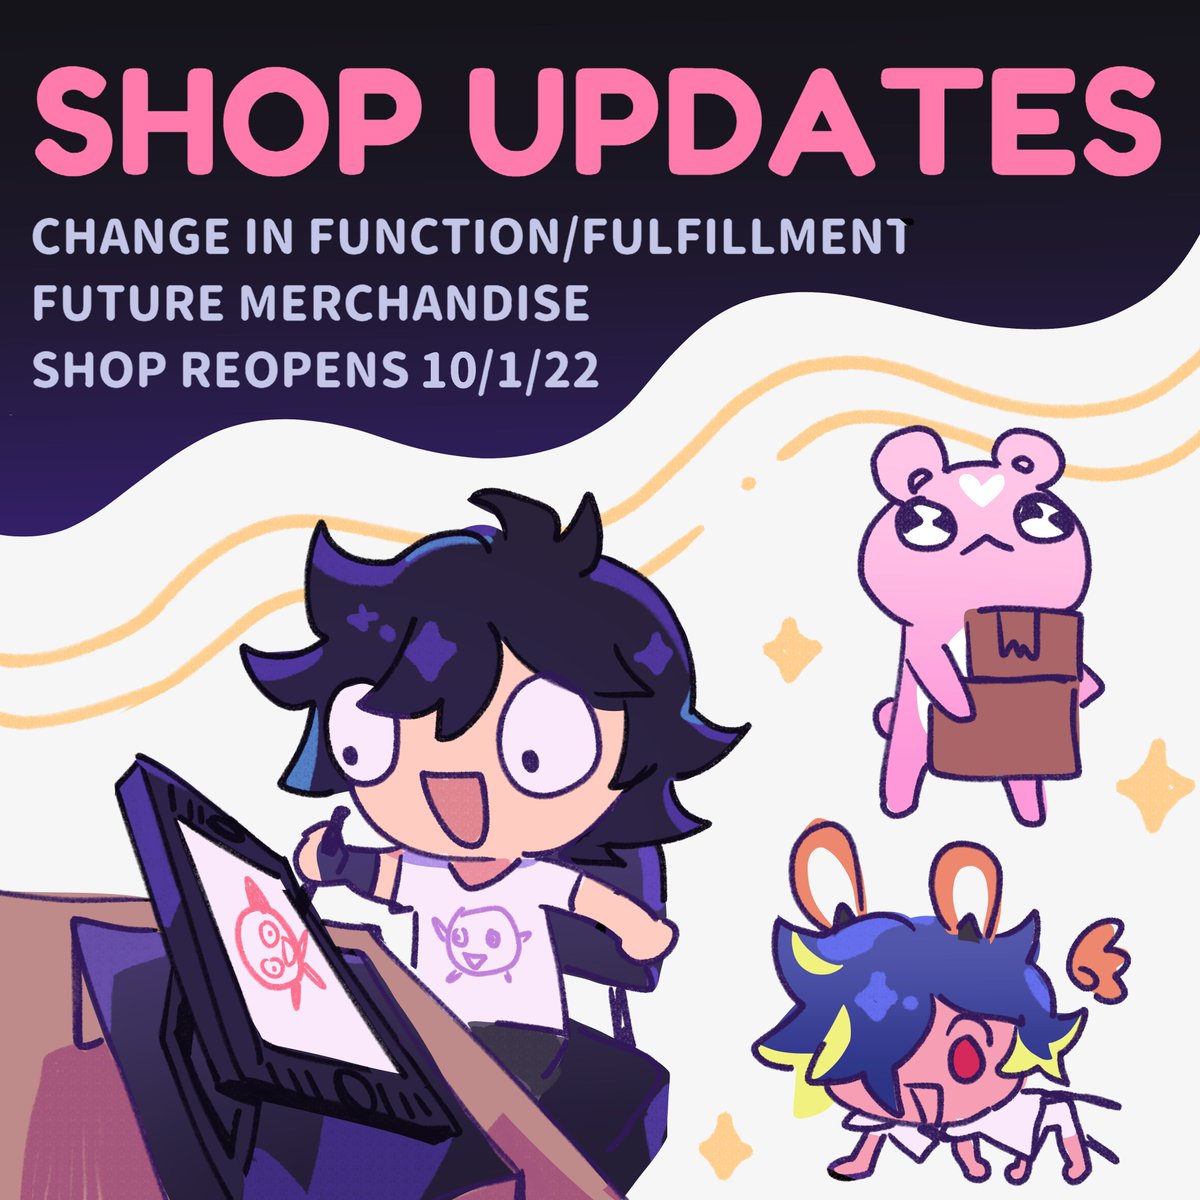 ST0RE NEWS!!!!
🍇 20% OFF DISCOUNT UPON REOPENING 10/1/22 (extremely rare‼️)
🍇 packages now shipped from @replikayt!
🍇 planned future designs!
-  read the images for more info! 💙 